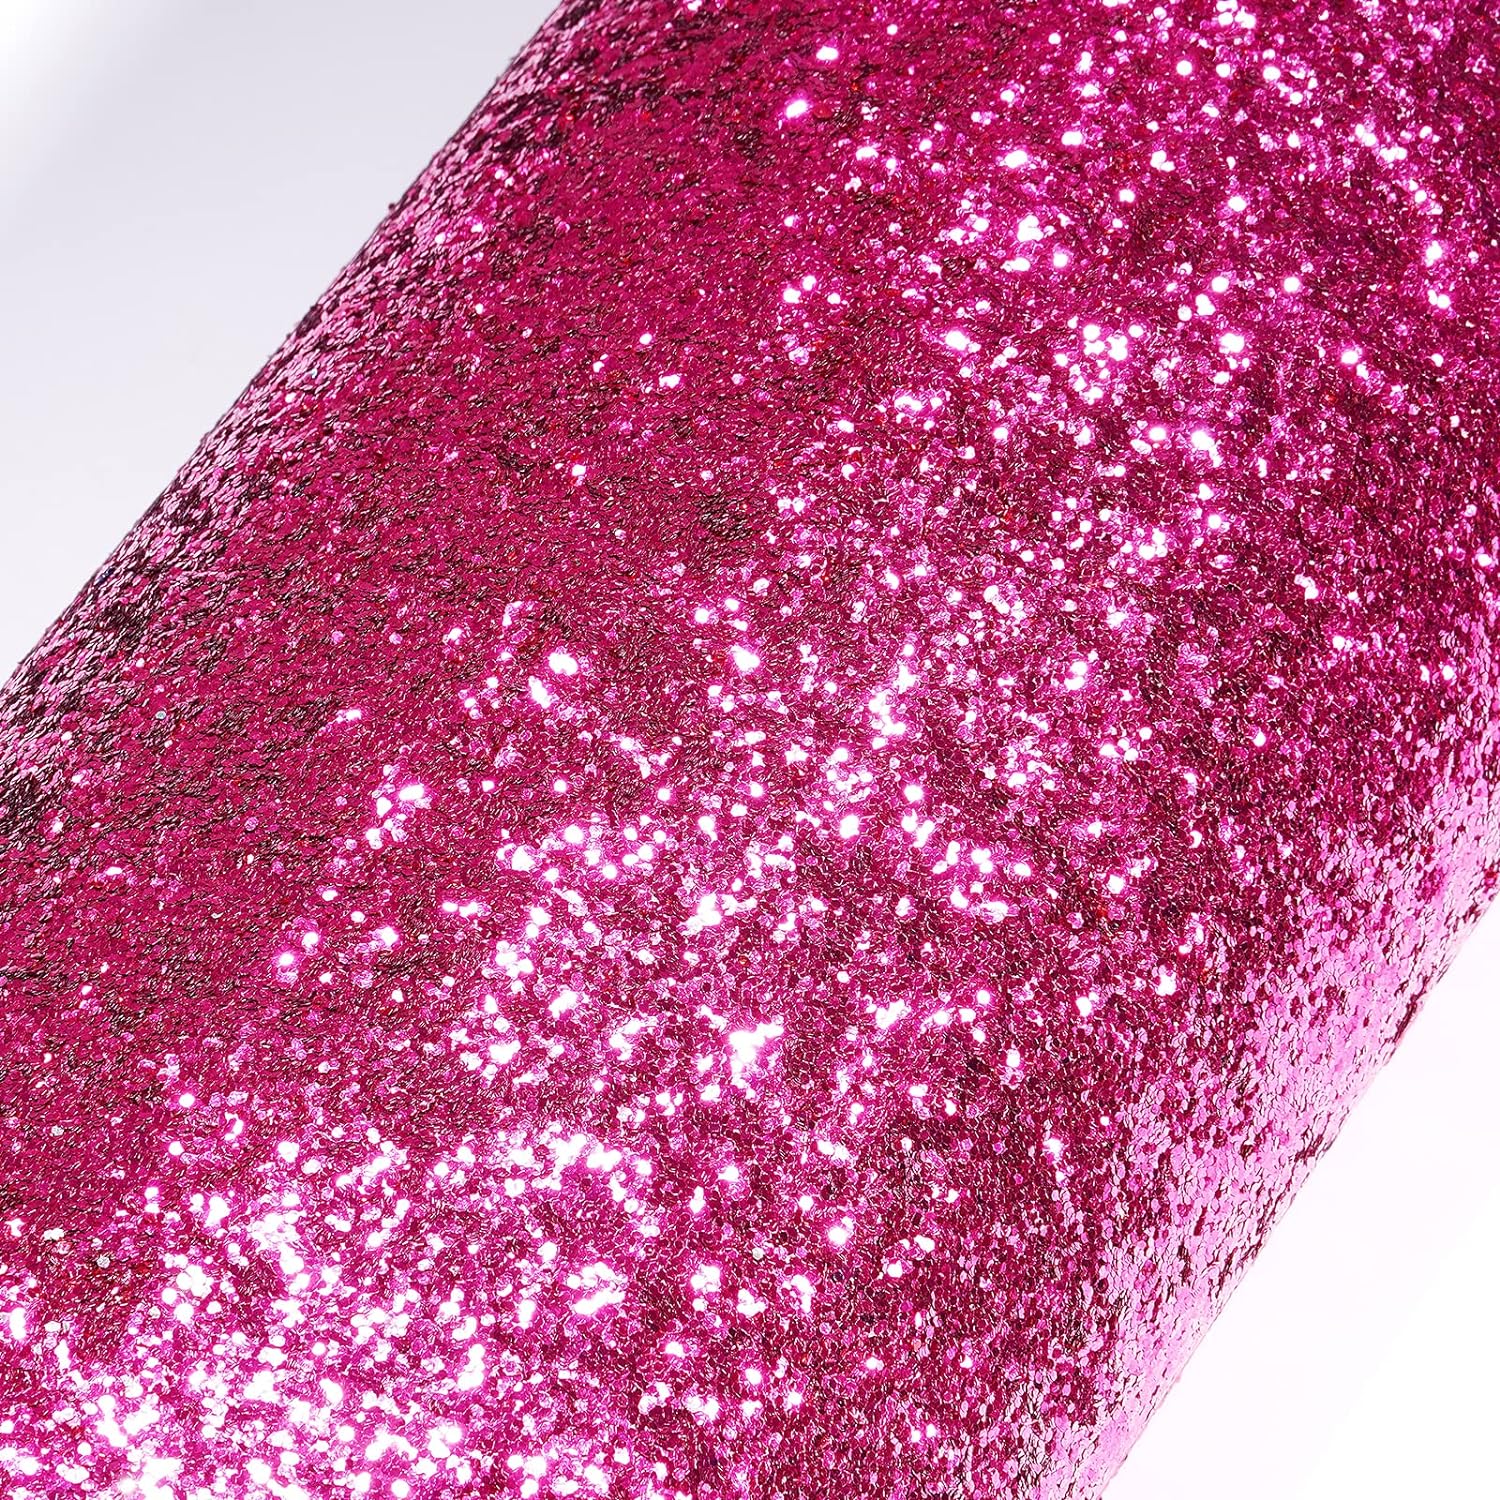 Stickyart Hot Pink Sequins Sparkle Wallpaper Self Adhesive Chunky Glitter Wallpaper Roll Peel and Stick Sparkly Contact Paper for Bedroom Girls Room Living Room 15.8x78.7